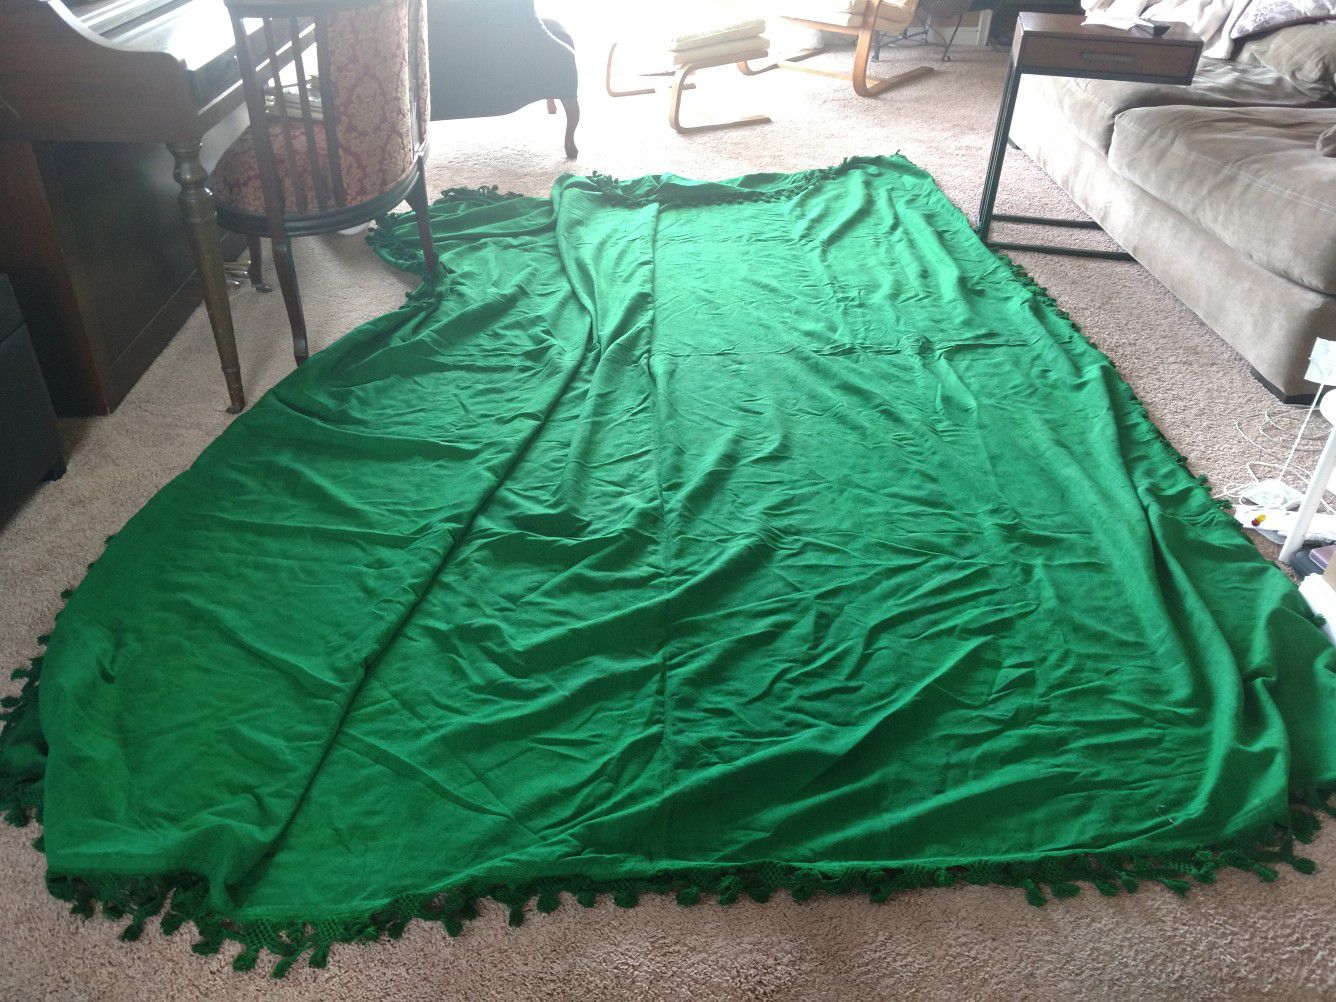 Giant Antique Green Table Cloth / Blanket in time for St Patrick's day!